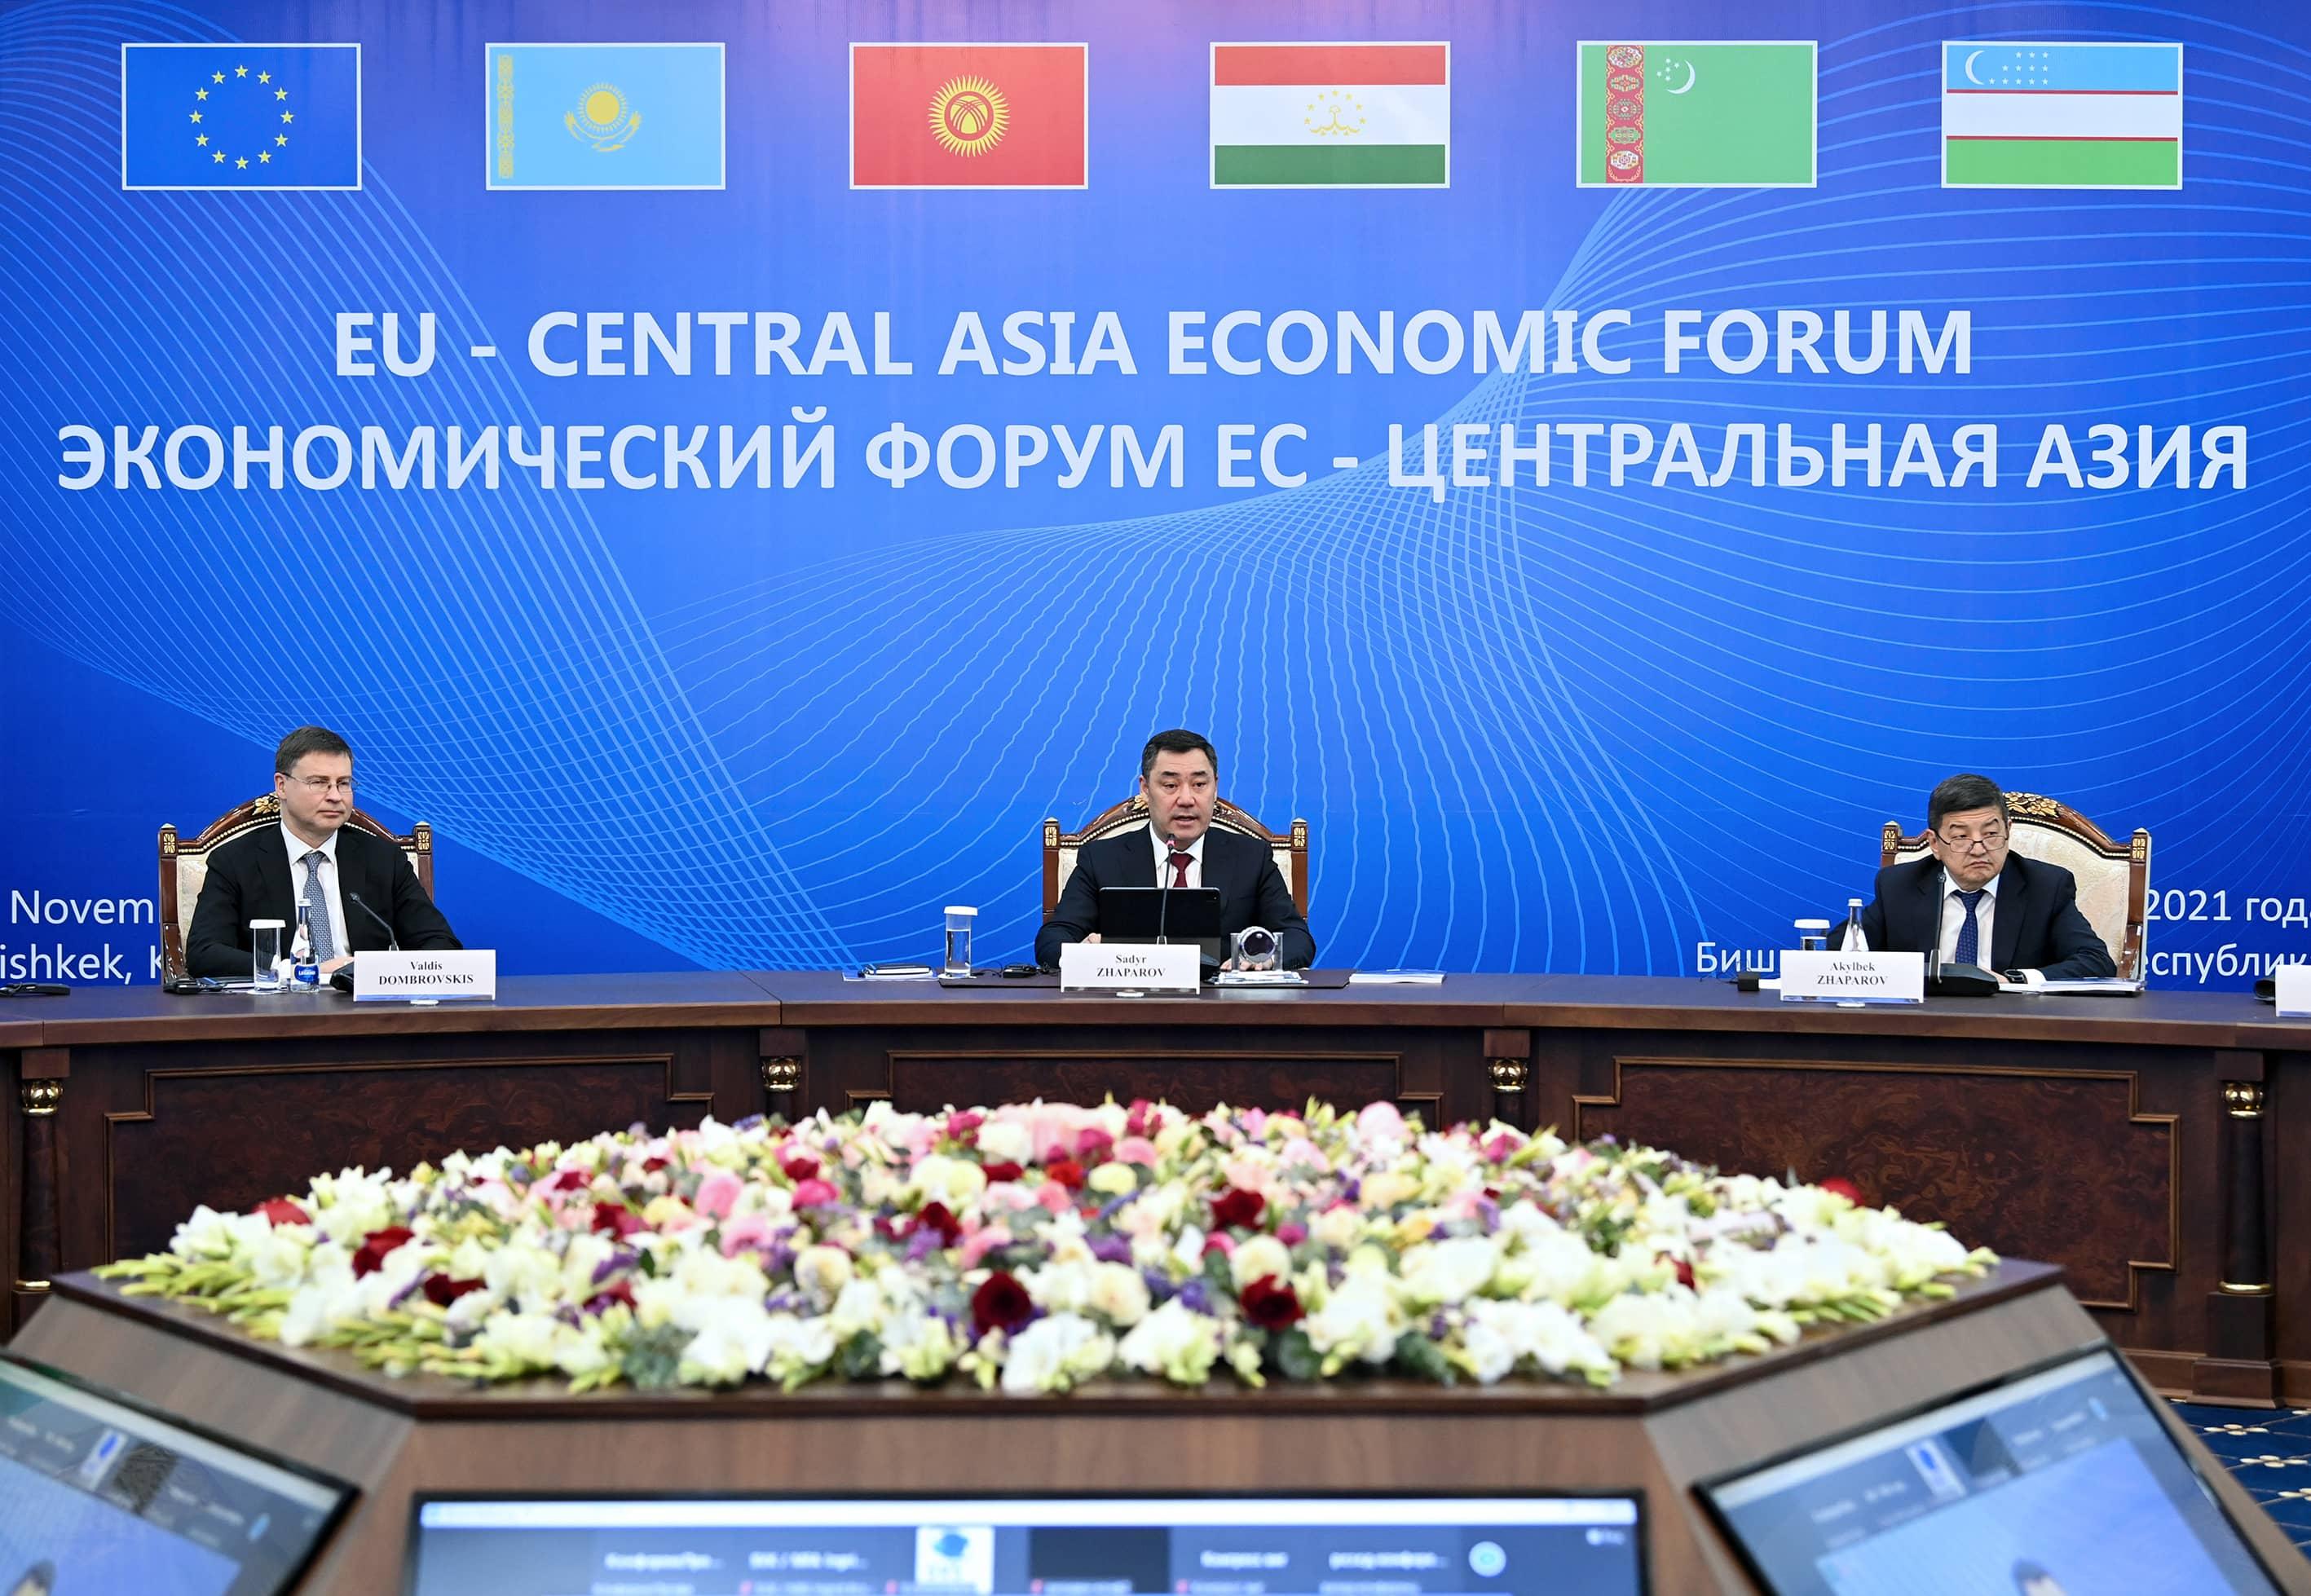 Room For Growth: The EU’s Trade and Investment Relationship with Central Asia